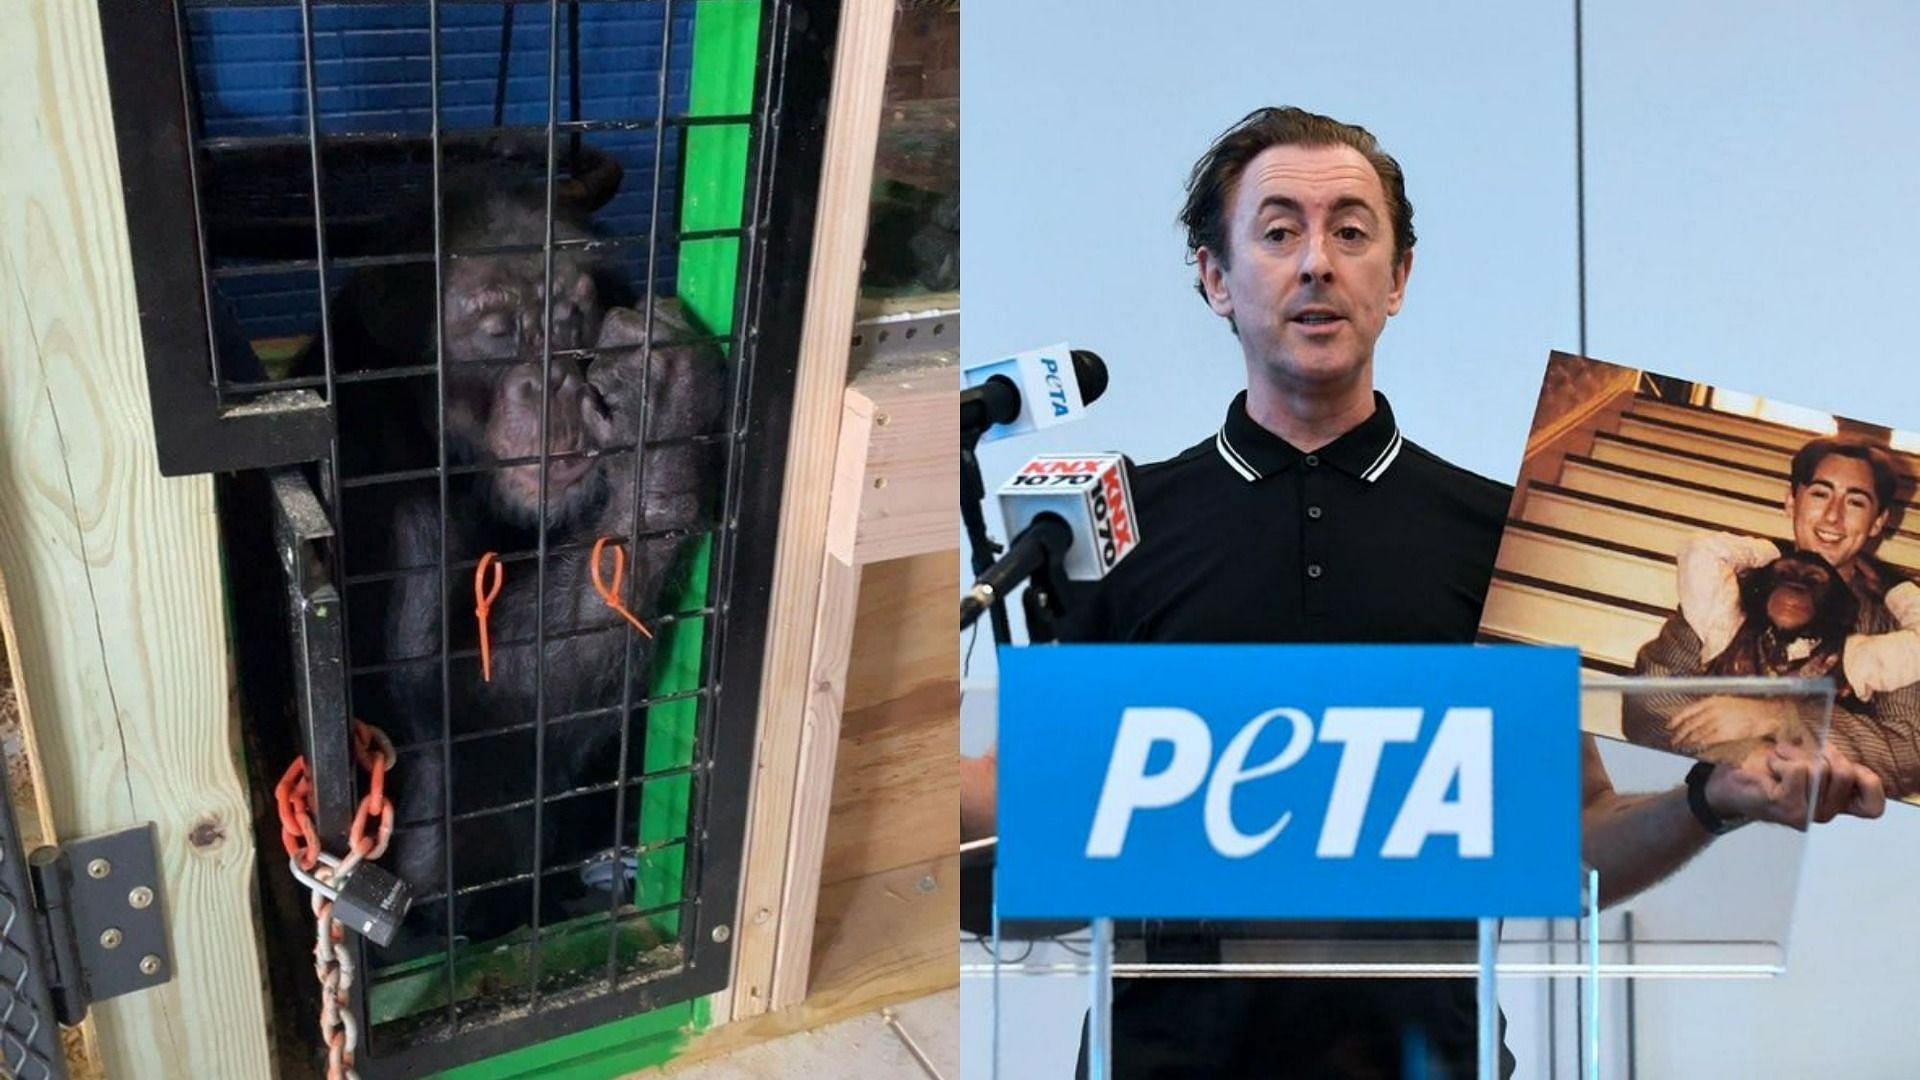 Movie star chimpanzee found after going missing for 11 months (Image via PETA/Facebook and AFP)